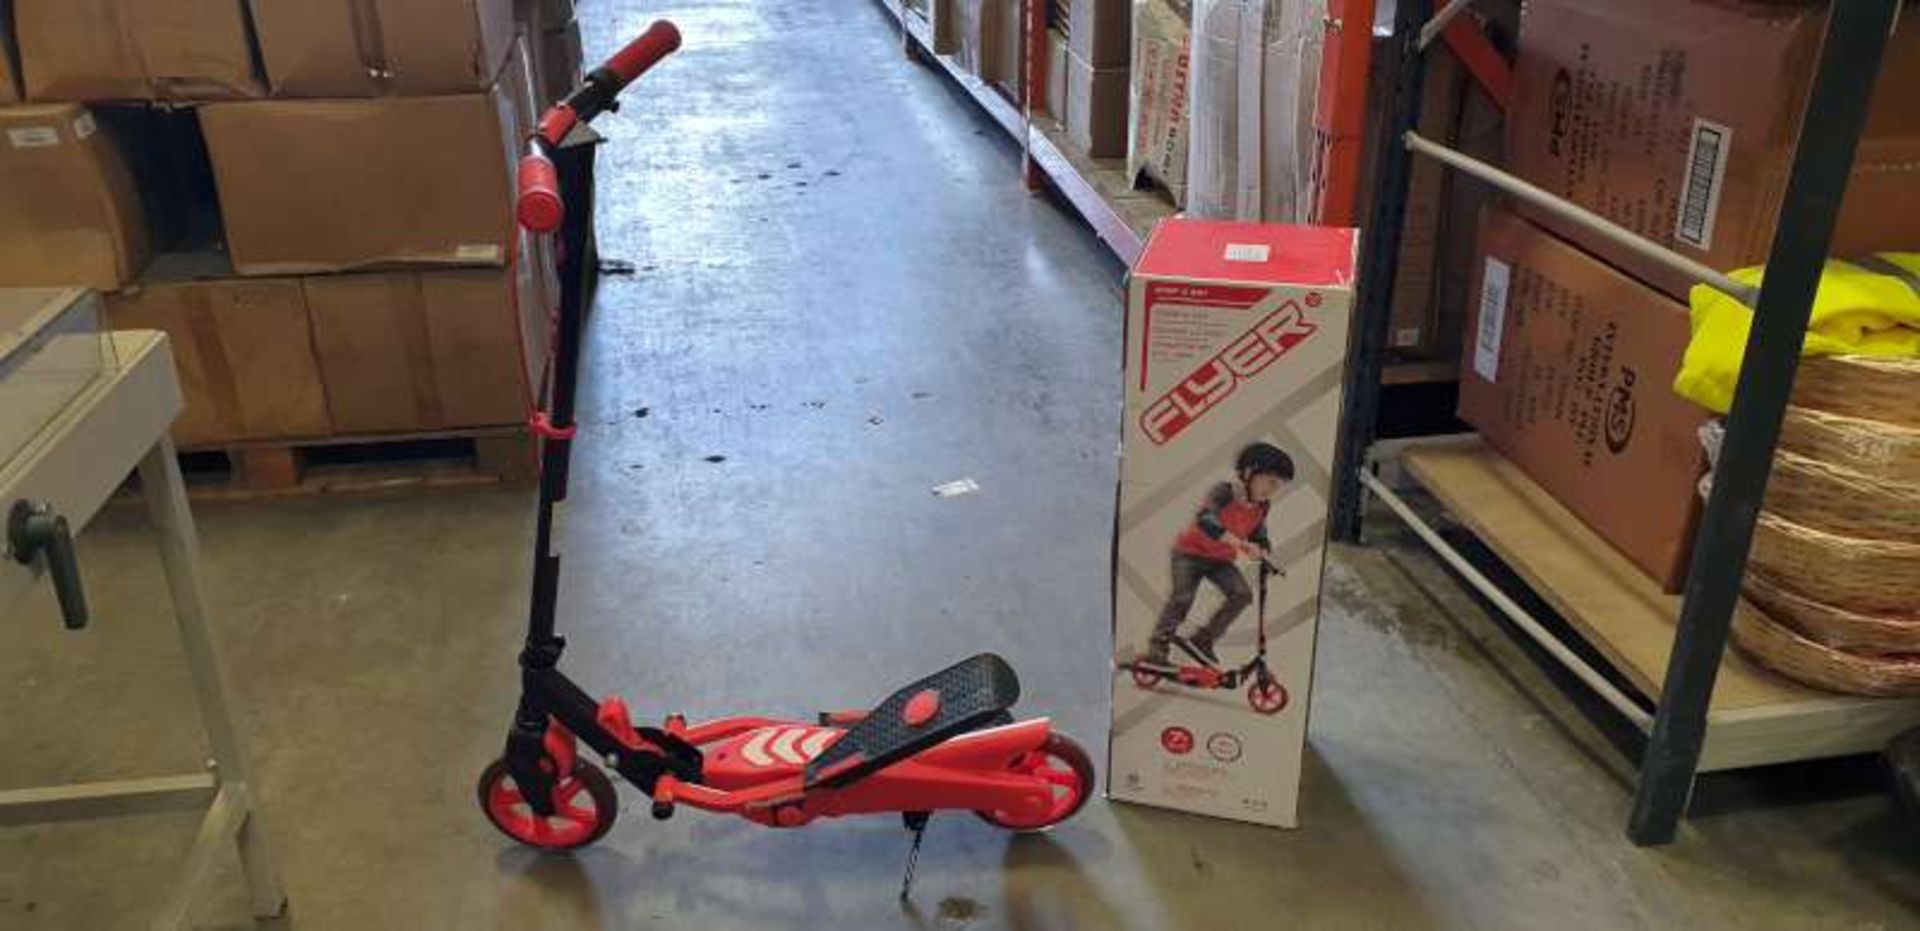 2 X BRAND NEW BOXED YVOLVE SPORTS FLYER SCOOTERS IN 1 BOX